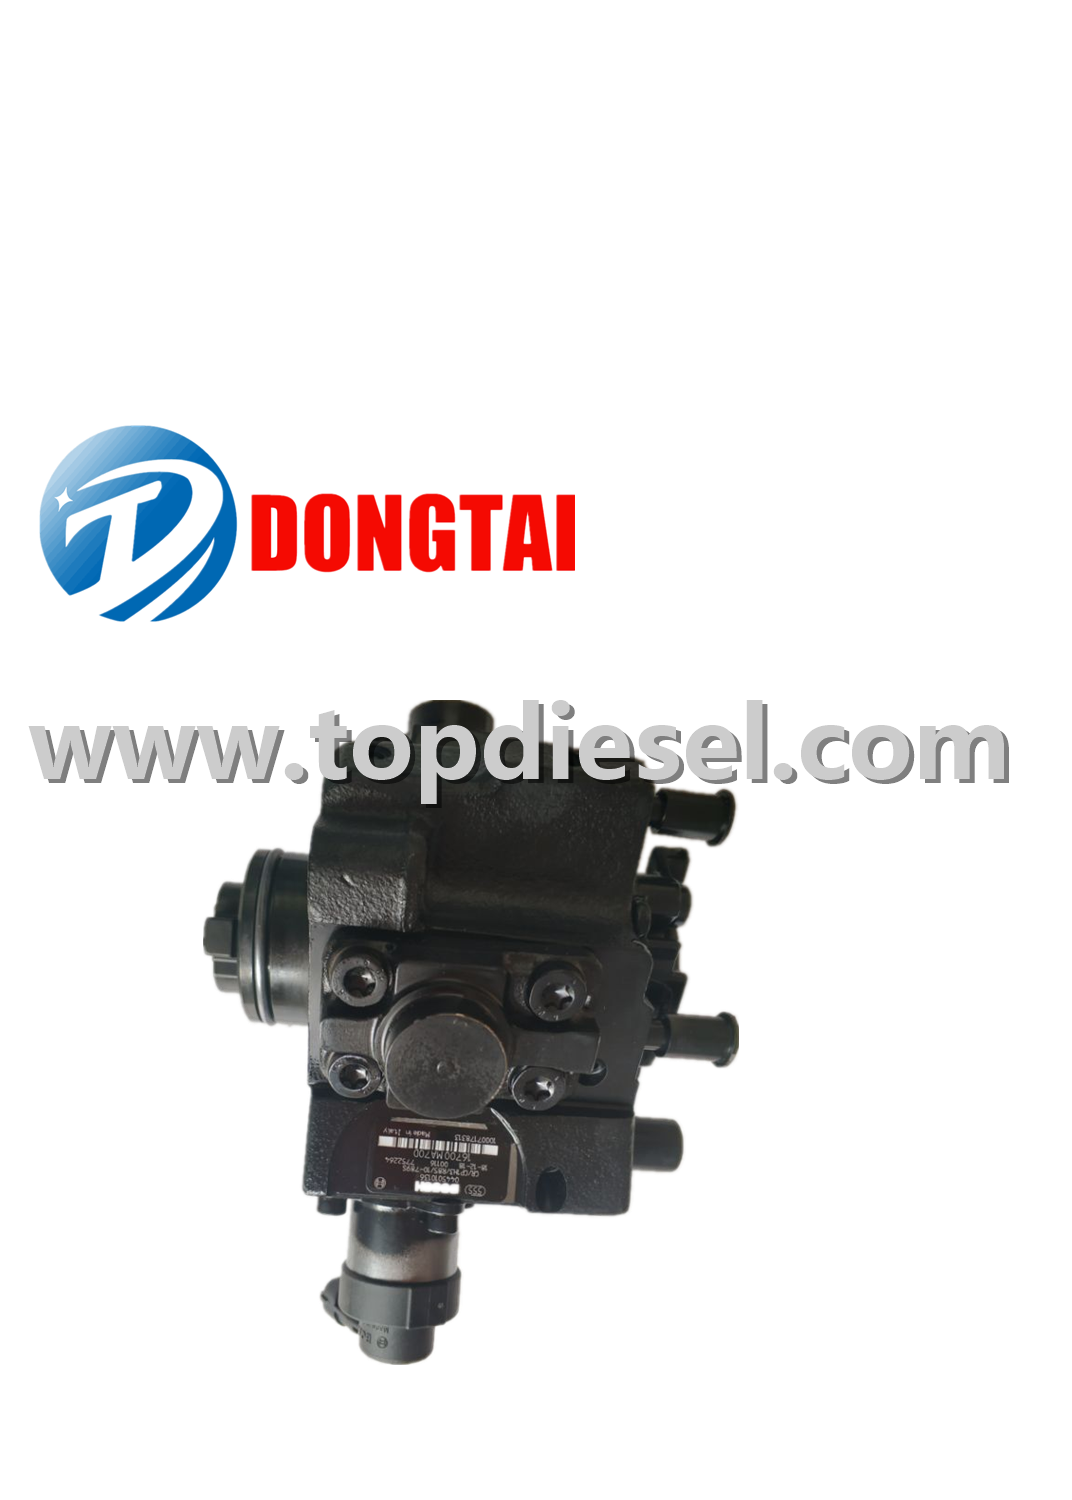 Original Factory Diesel Fuel Injection Pump Test Bench - 0445020035 – Dongtai